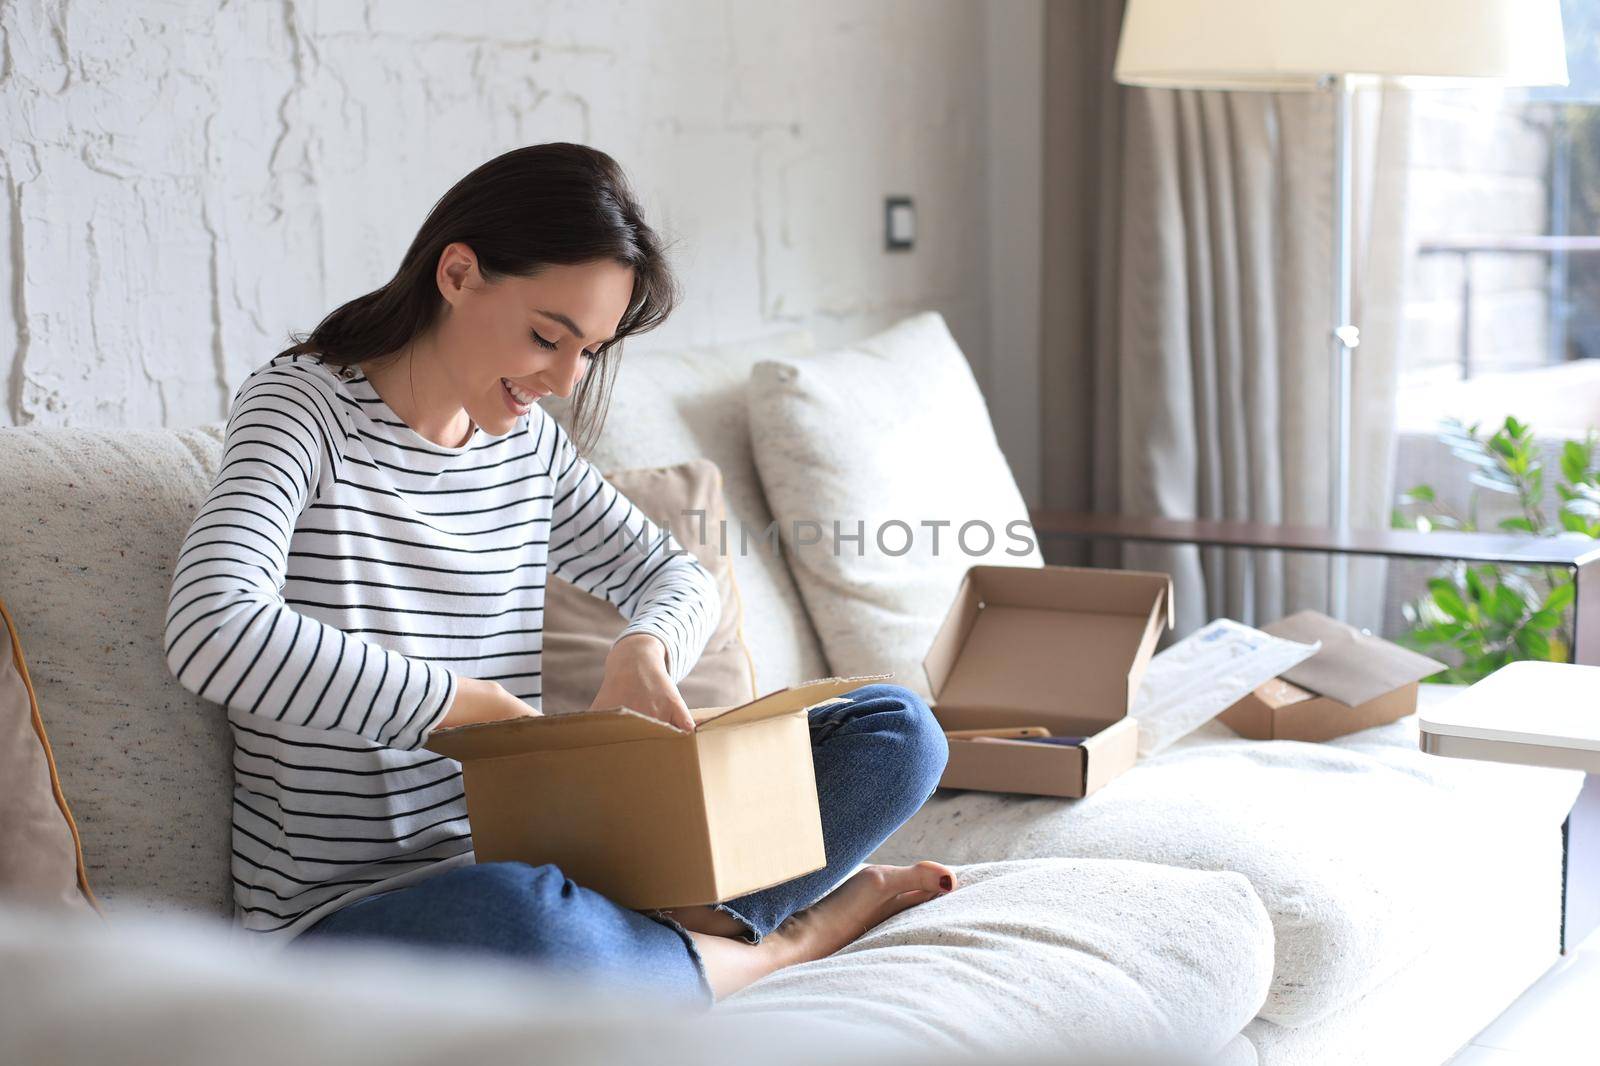 Beautiful young woman is holding cardboard box and unpacking it sitting on sofa at home. by tsyhun